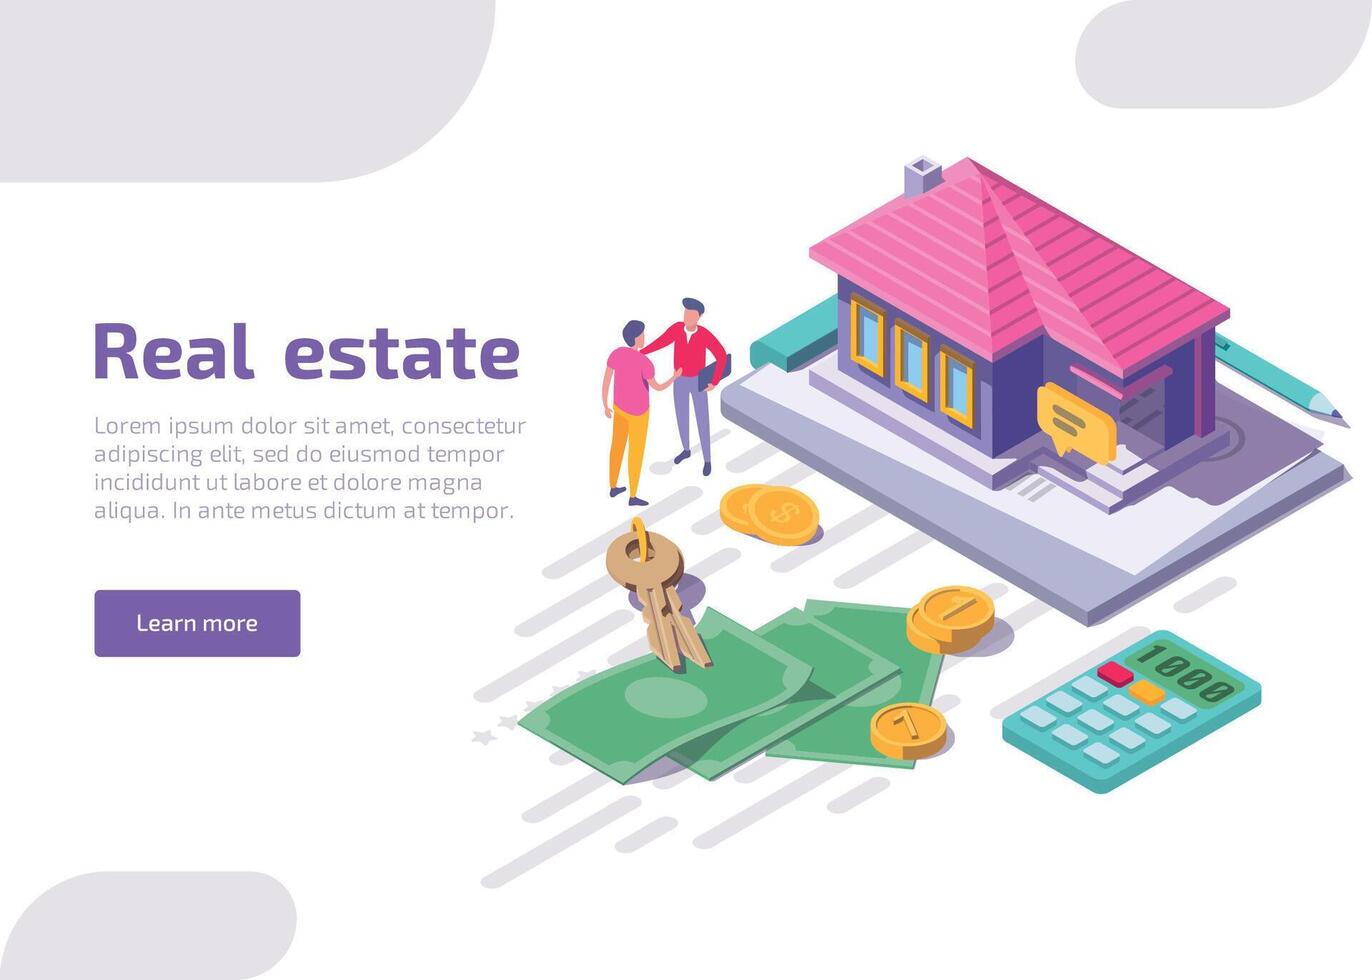 Real estate isometric landing page. Web banner design of cottage with key, calculator, scattered coins and money bills. Character man makes a deal with an agent. House loan, rent and mortgage concept. vector